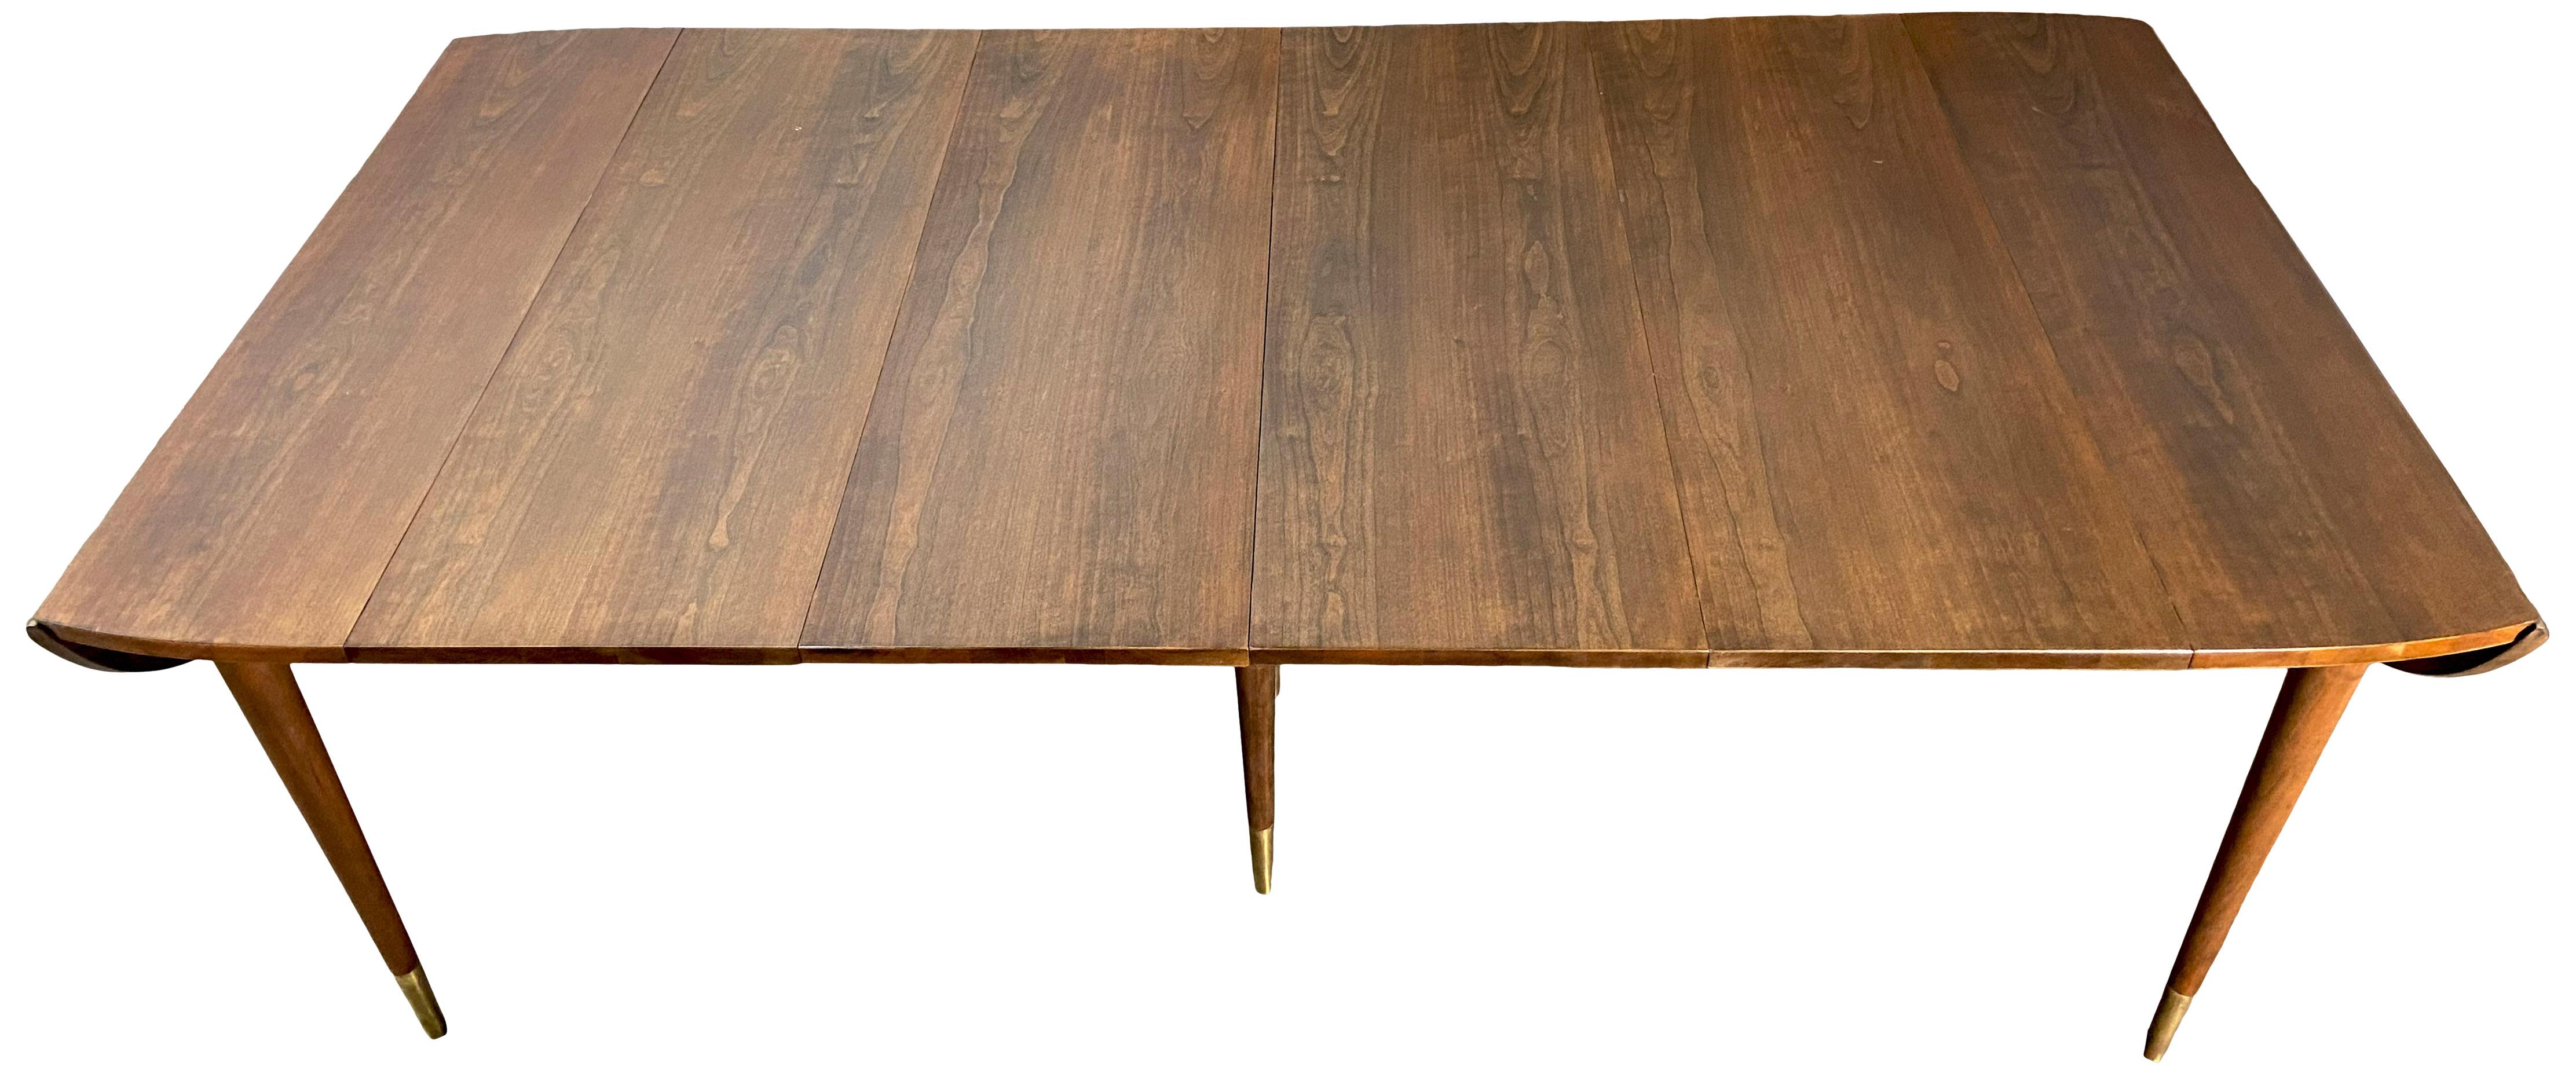 Midcentury Extension Drop-Leaf Dining Table by John Widdicomb 1